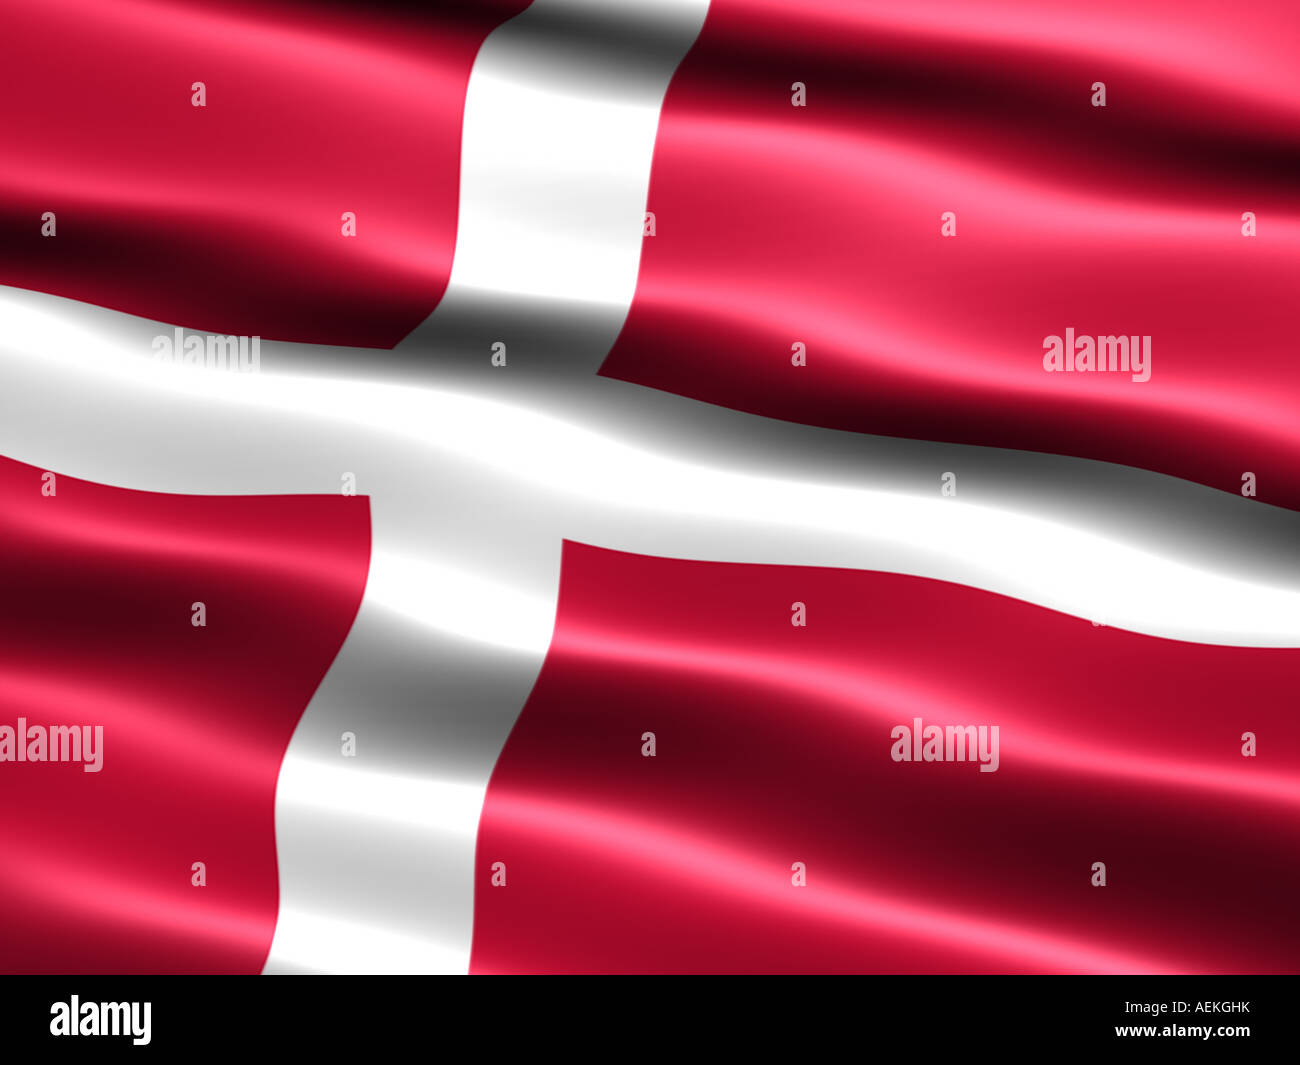 Computer generated illustration of the flag of Denmark with silky appearance and waves Stock Photo